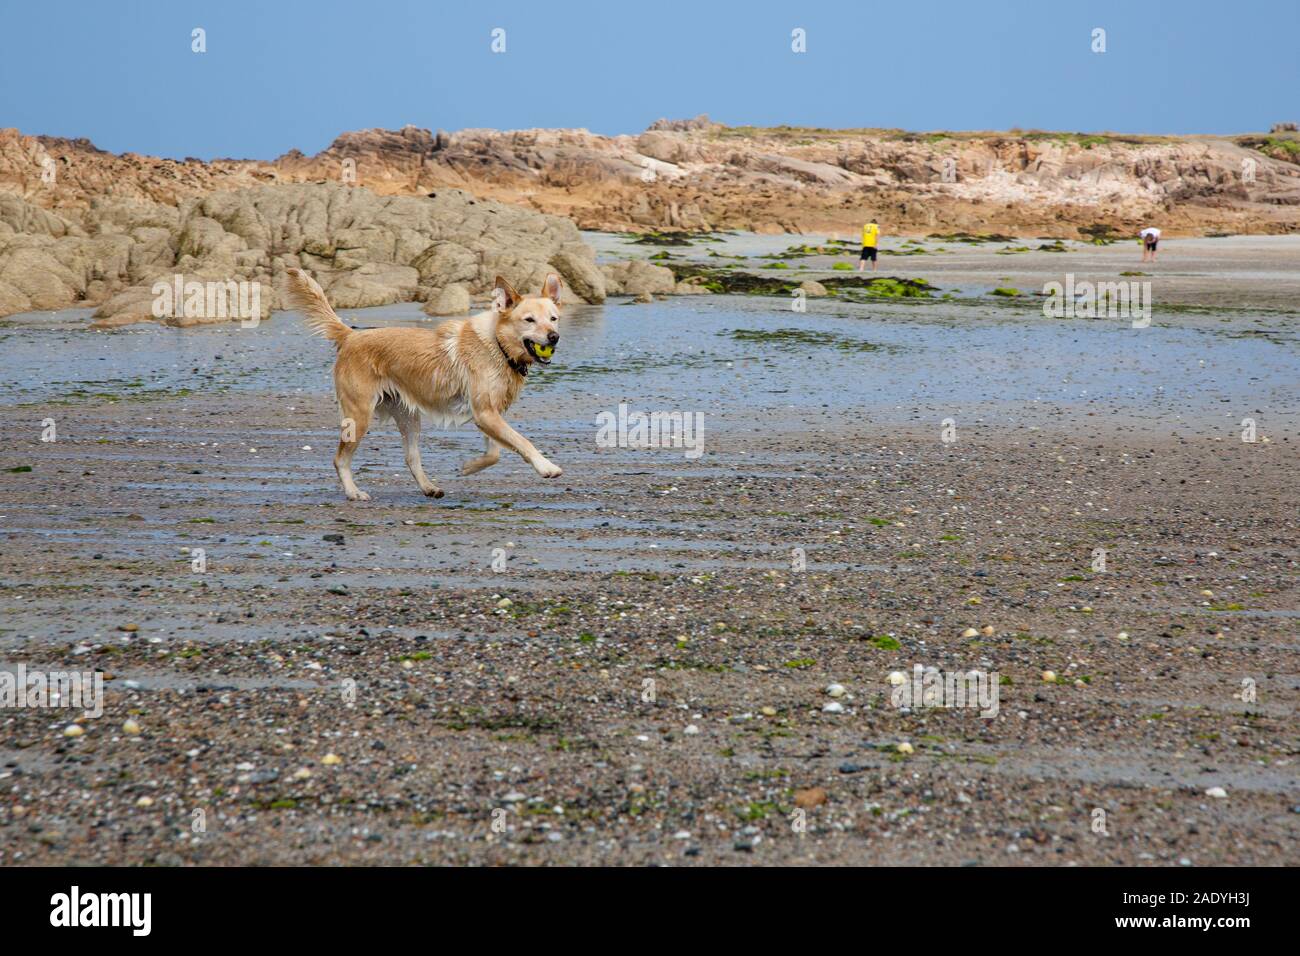 Dog Running on the beach with rugged rocks, channel islands Stock Photo